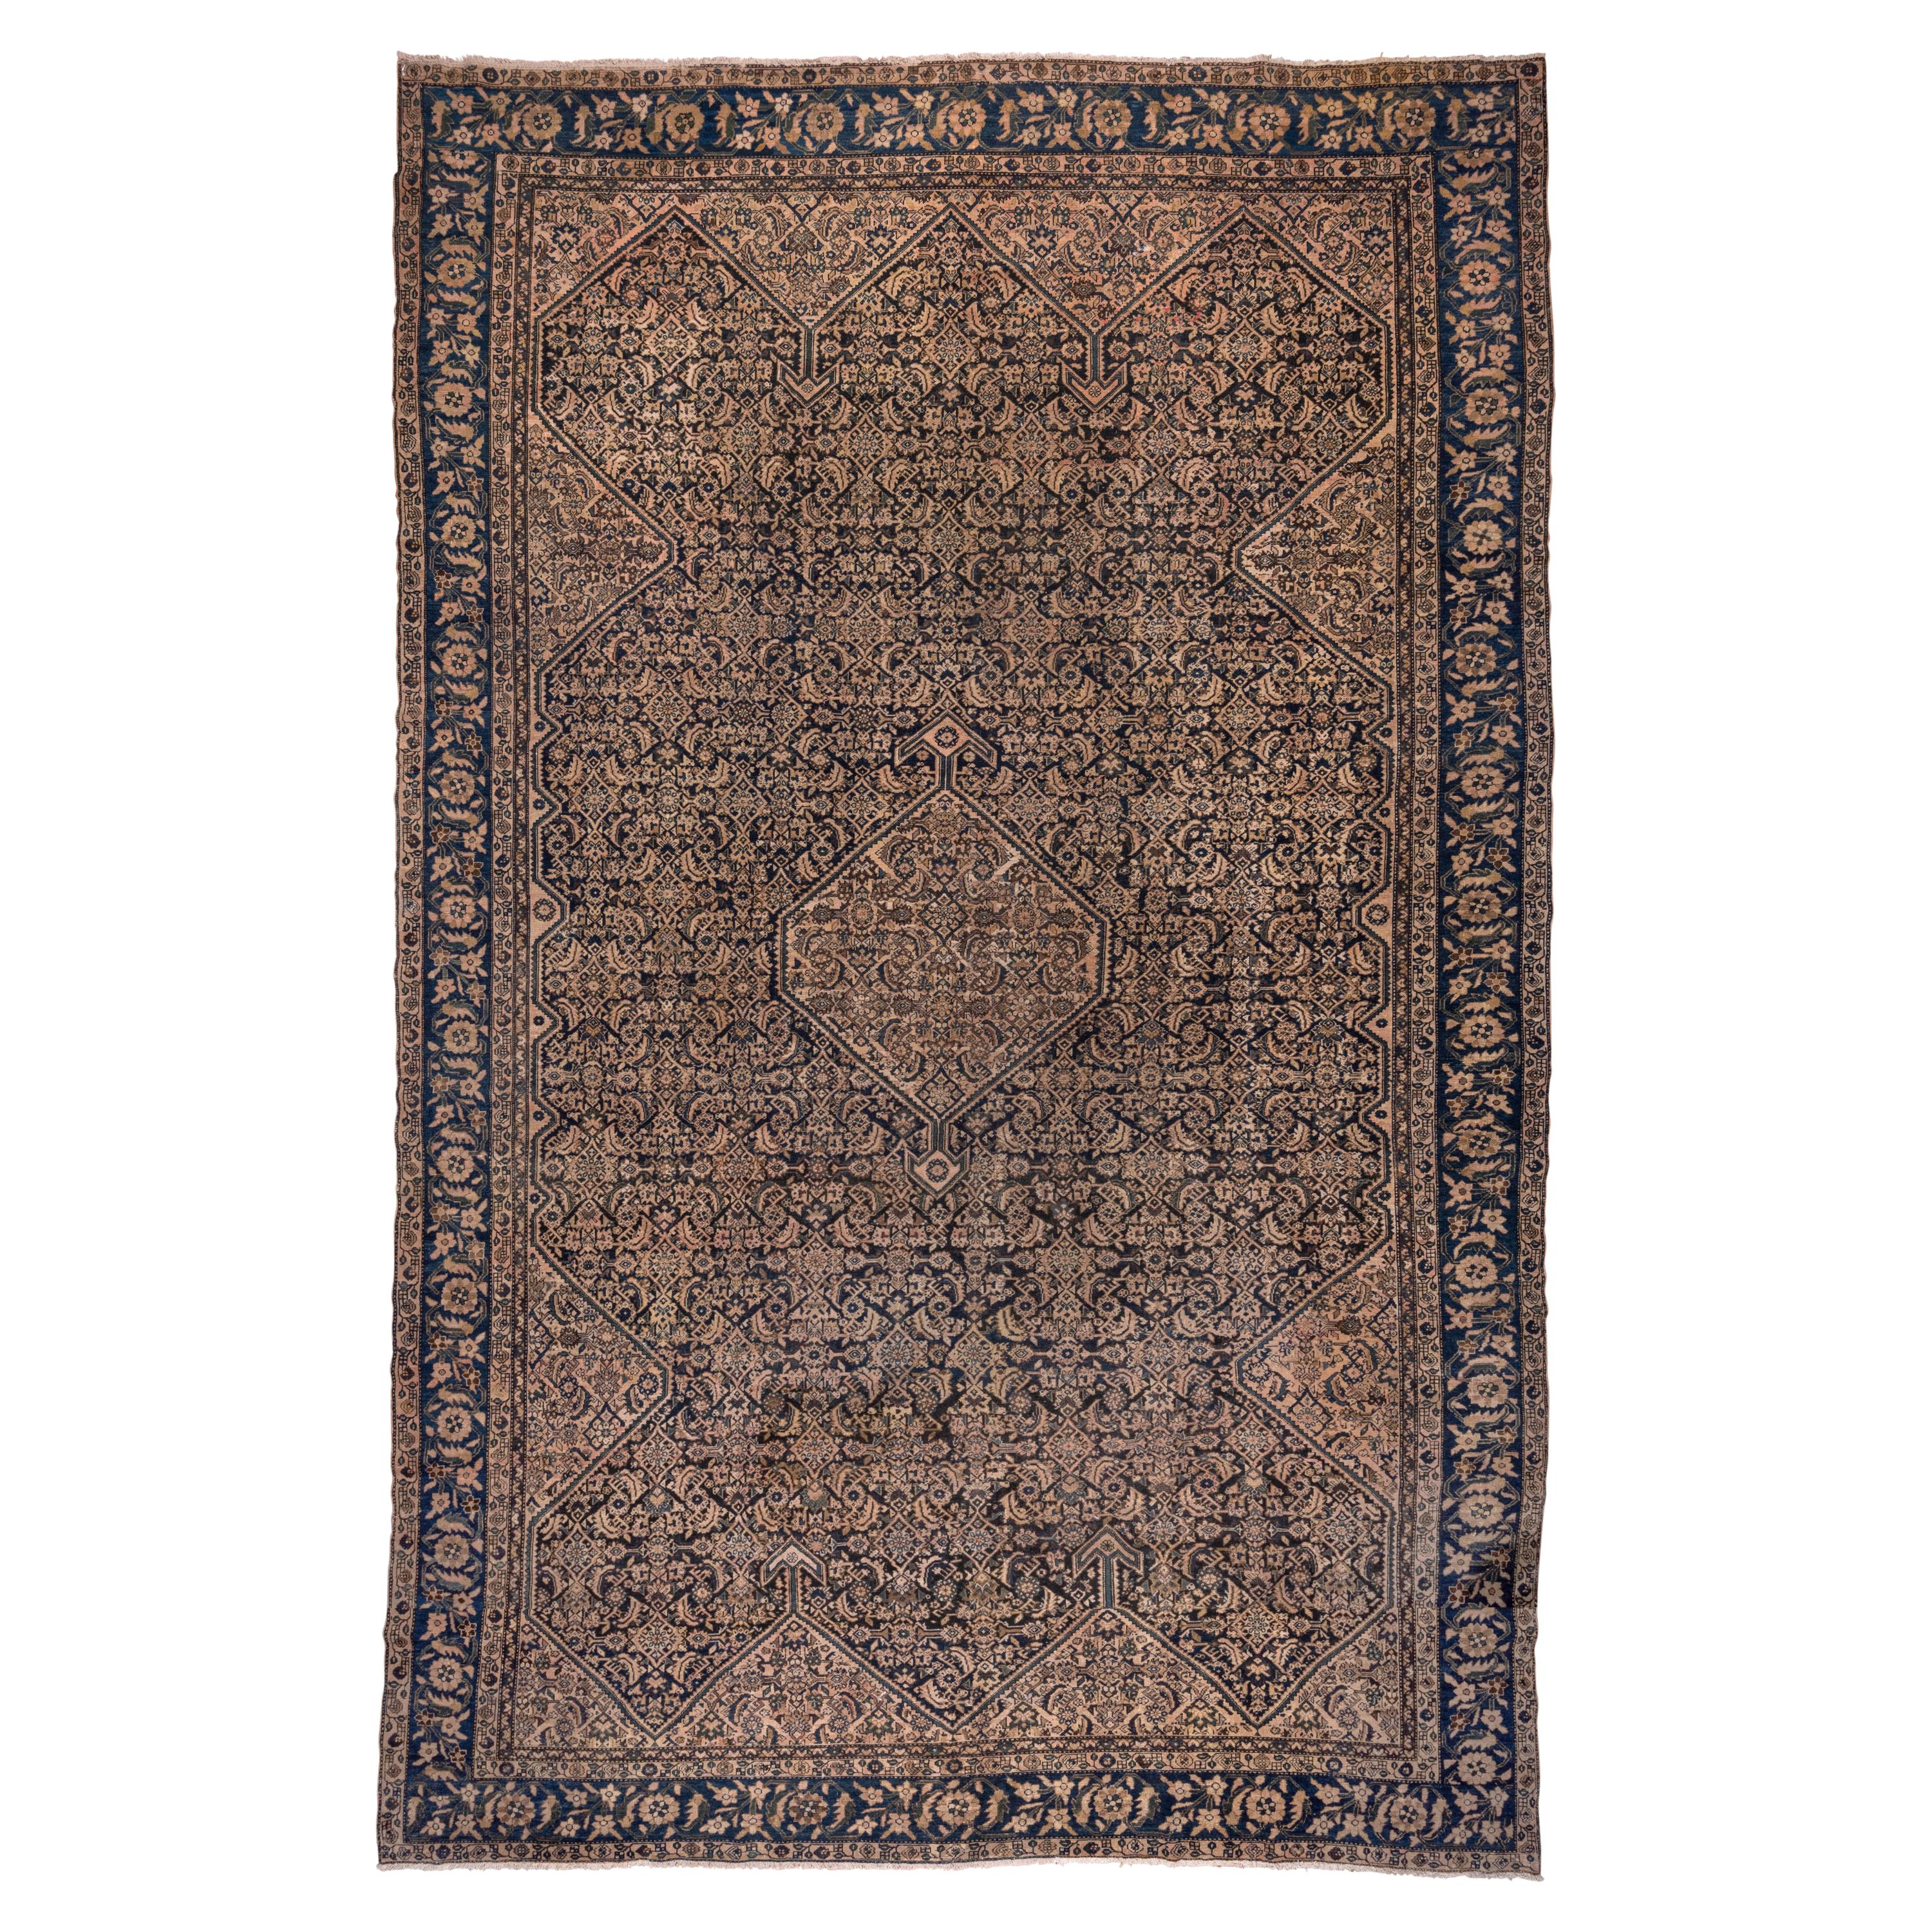 Antique Persian Malayer Carpet, Ivory and Navy Field, circa 1910s